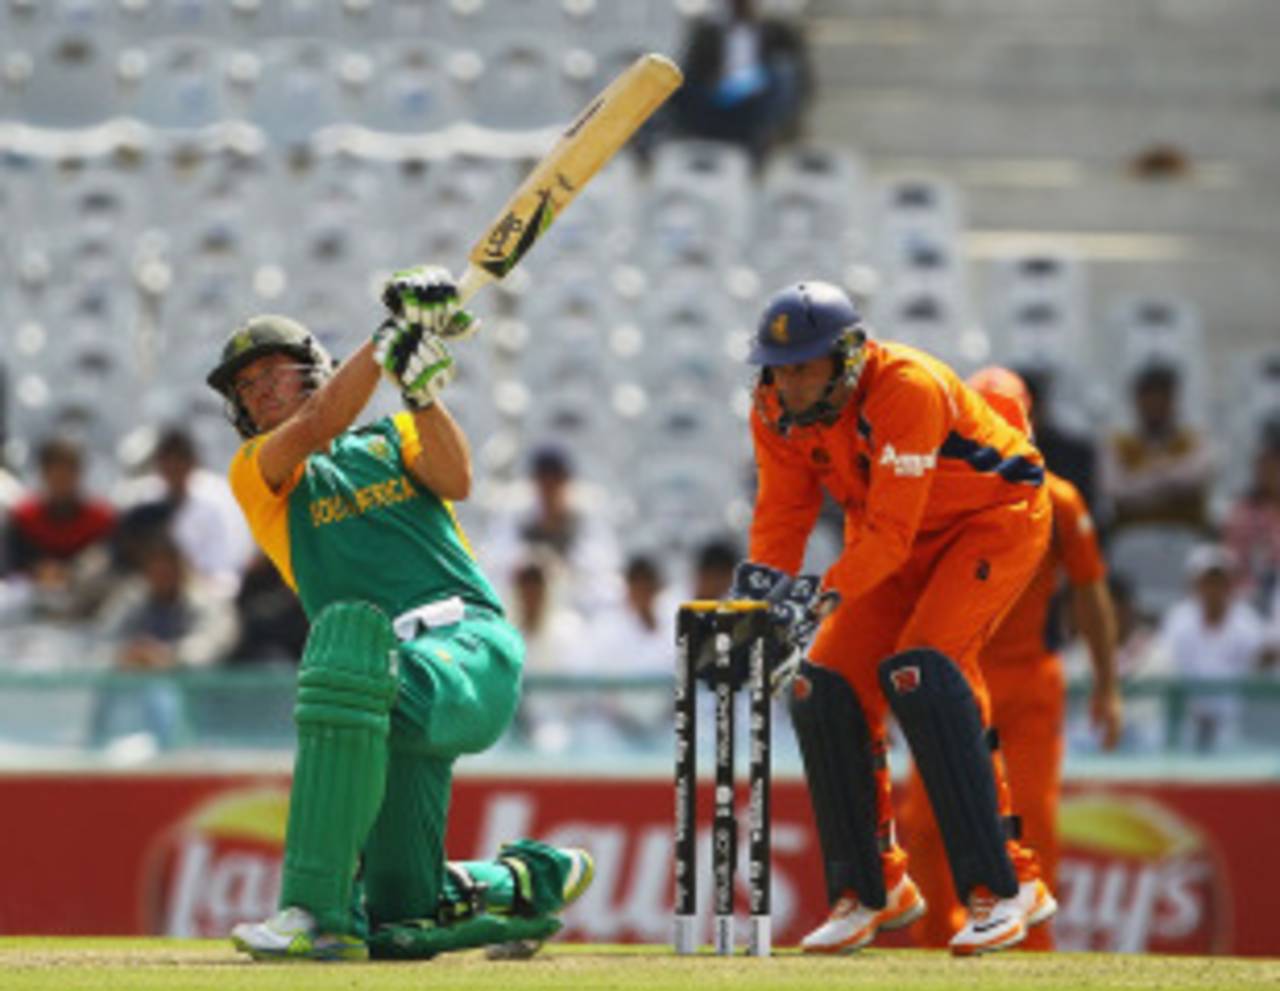 AB de Villiers launched into the Netherlands attack with a rash of big hits&nbsp;&nbsp;&bull;&nbsp;&nbsp;Getty Images